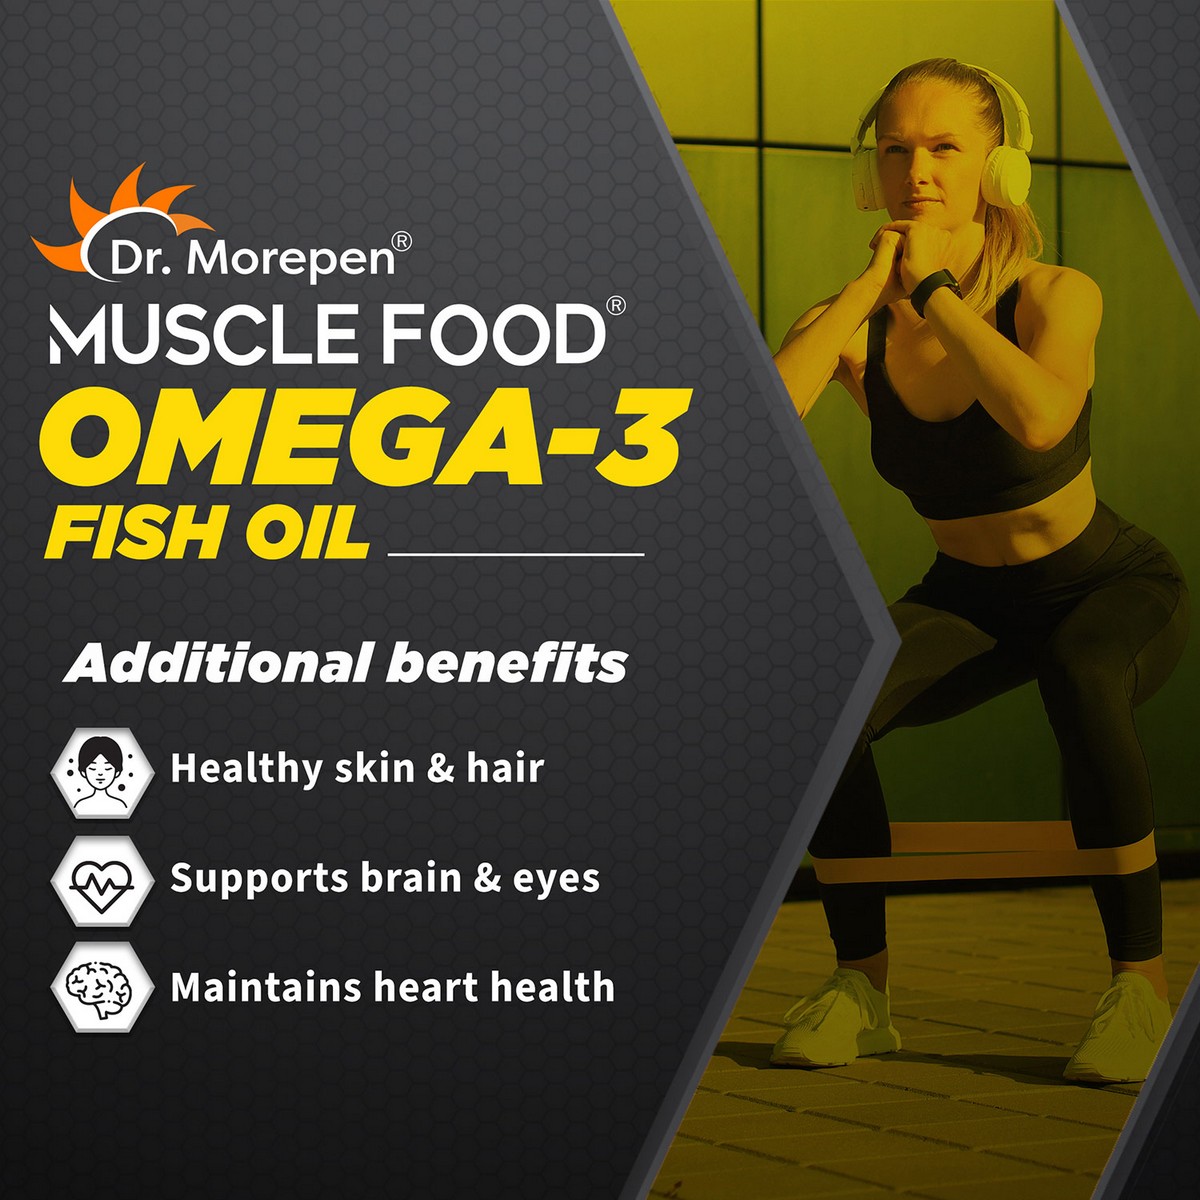 Dr. Morepen Musclefood Omega 3 2000mg Fish Oil Softgels Buy 1 Get 1 Free 5